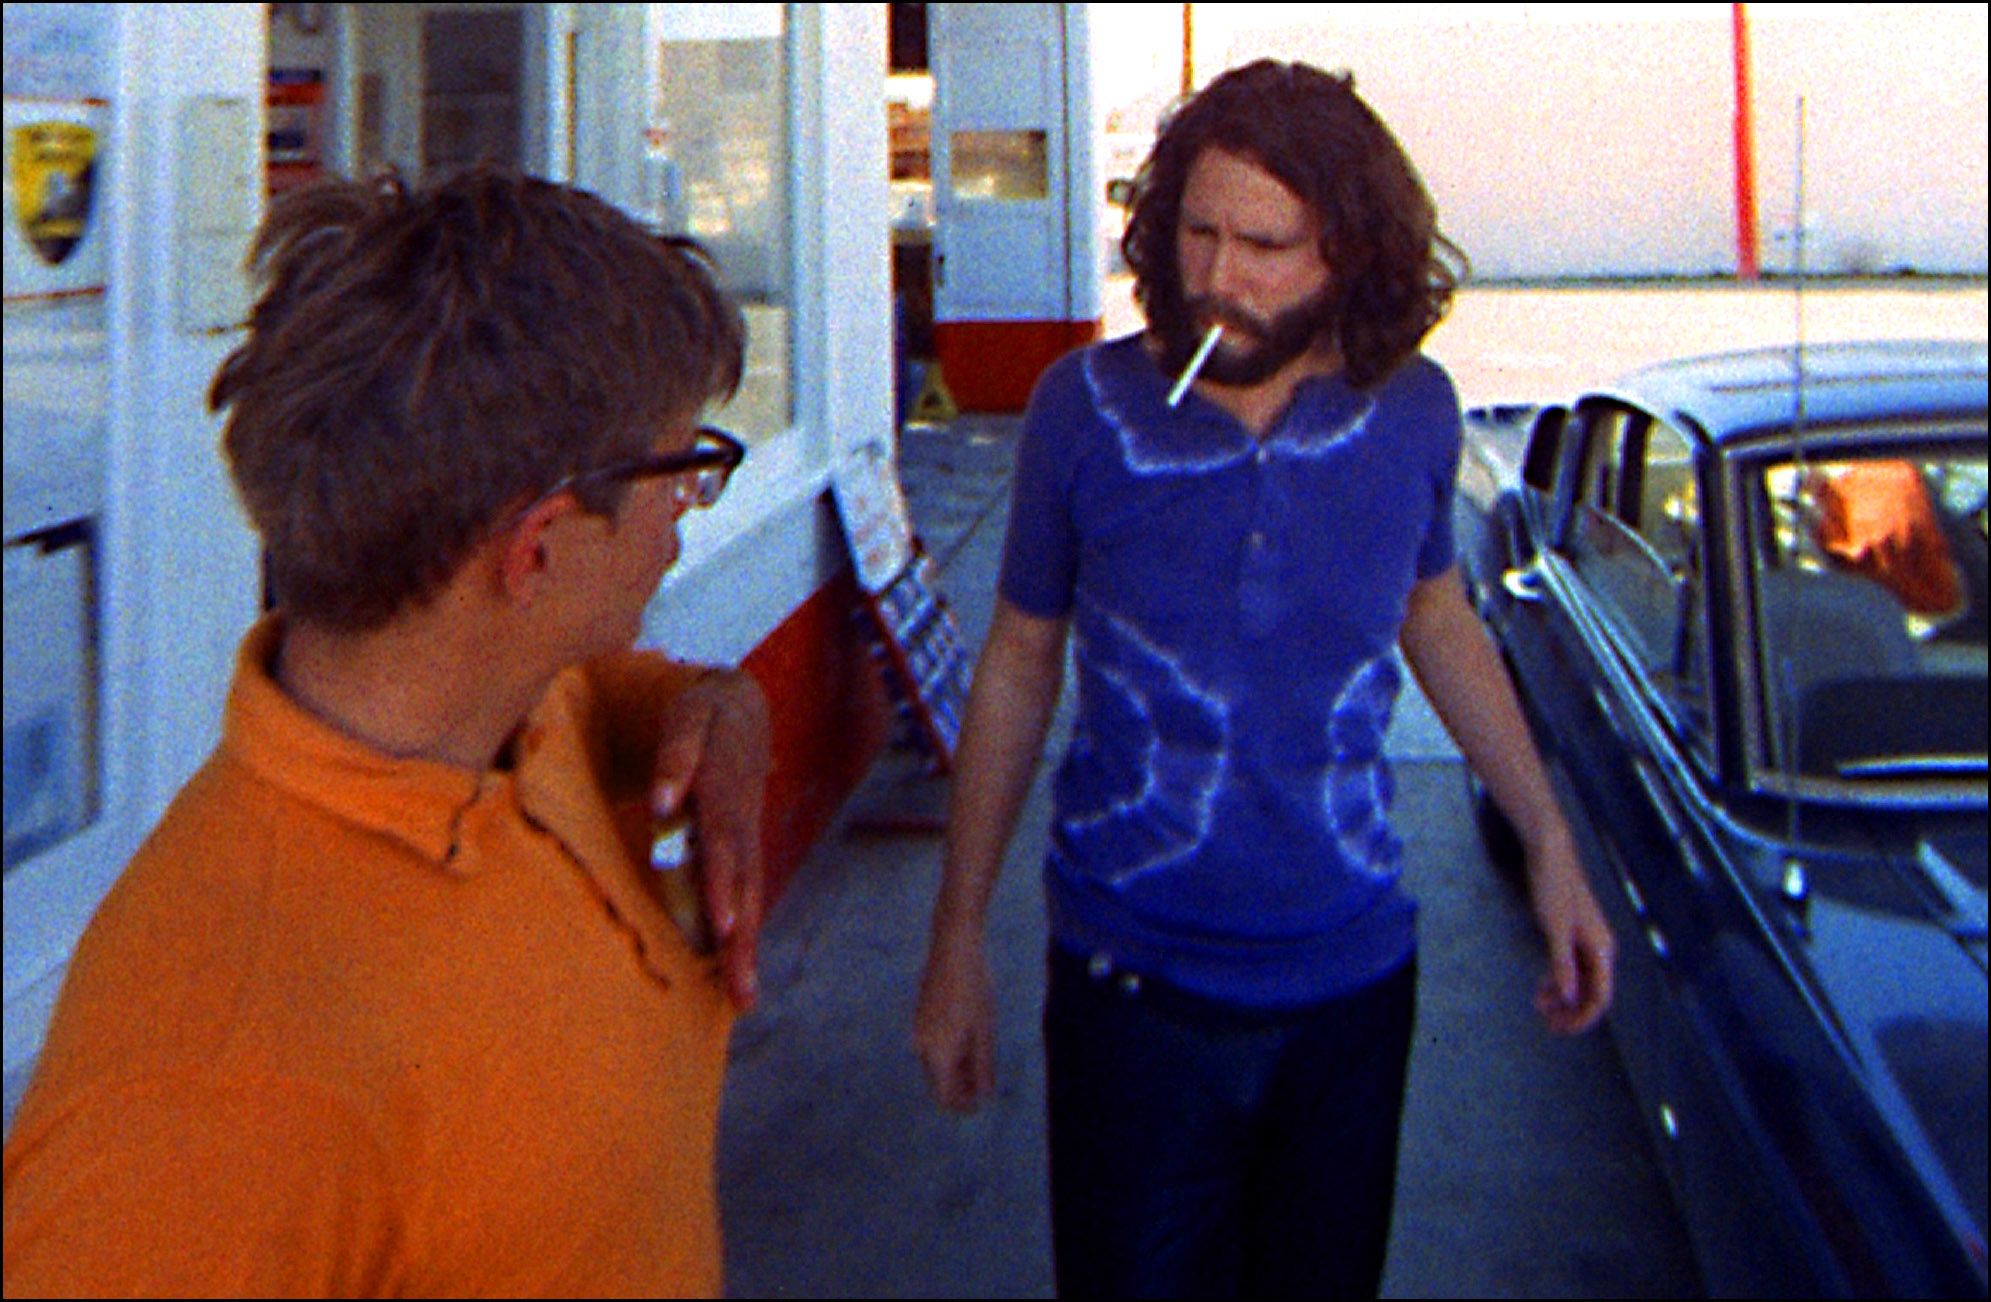 Jim Morrison as the “hitchhiker” in his film HWY and freeze-frame from When You’re Strange